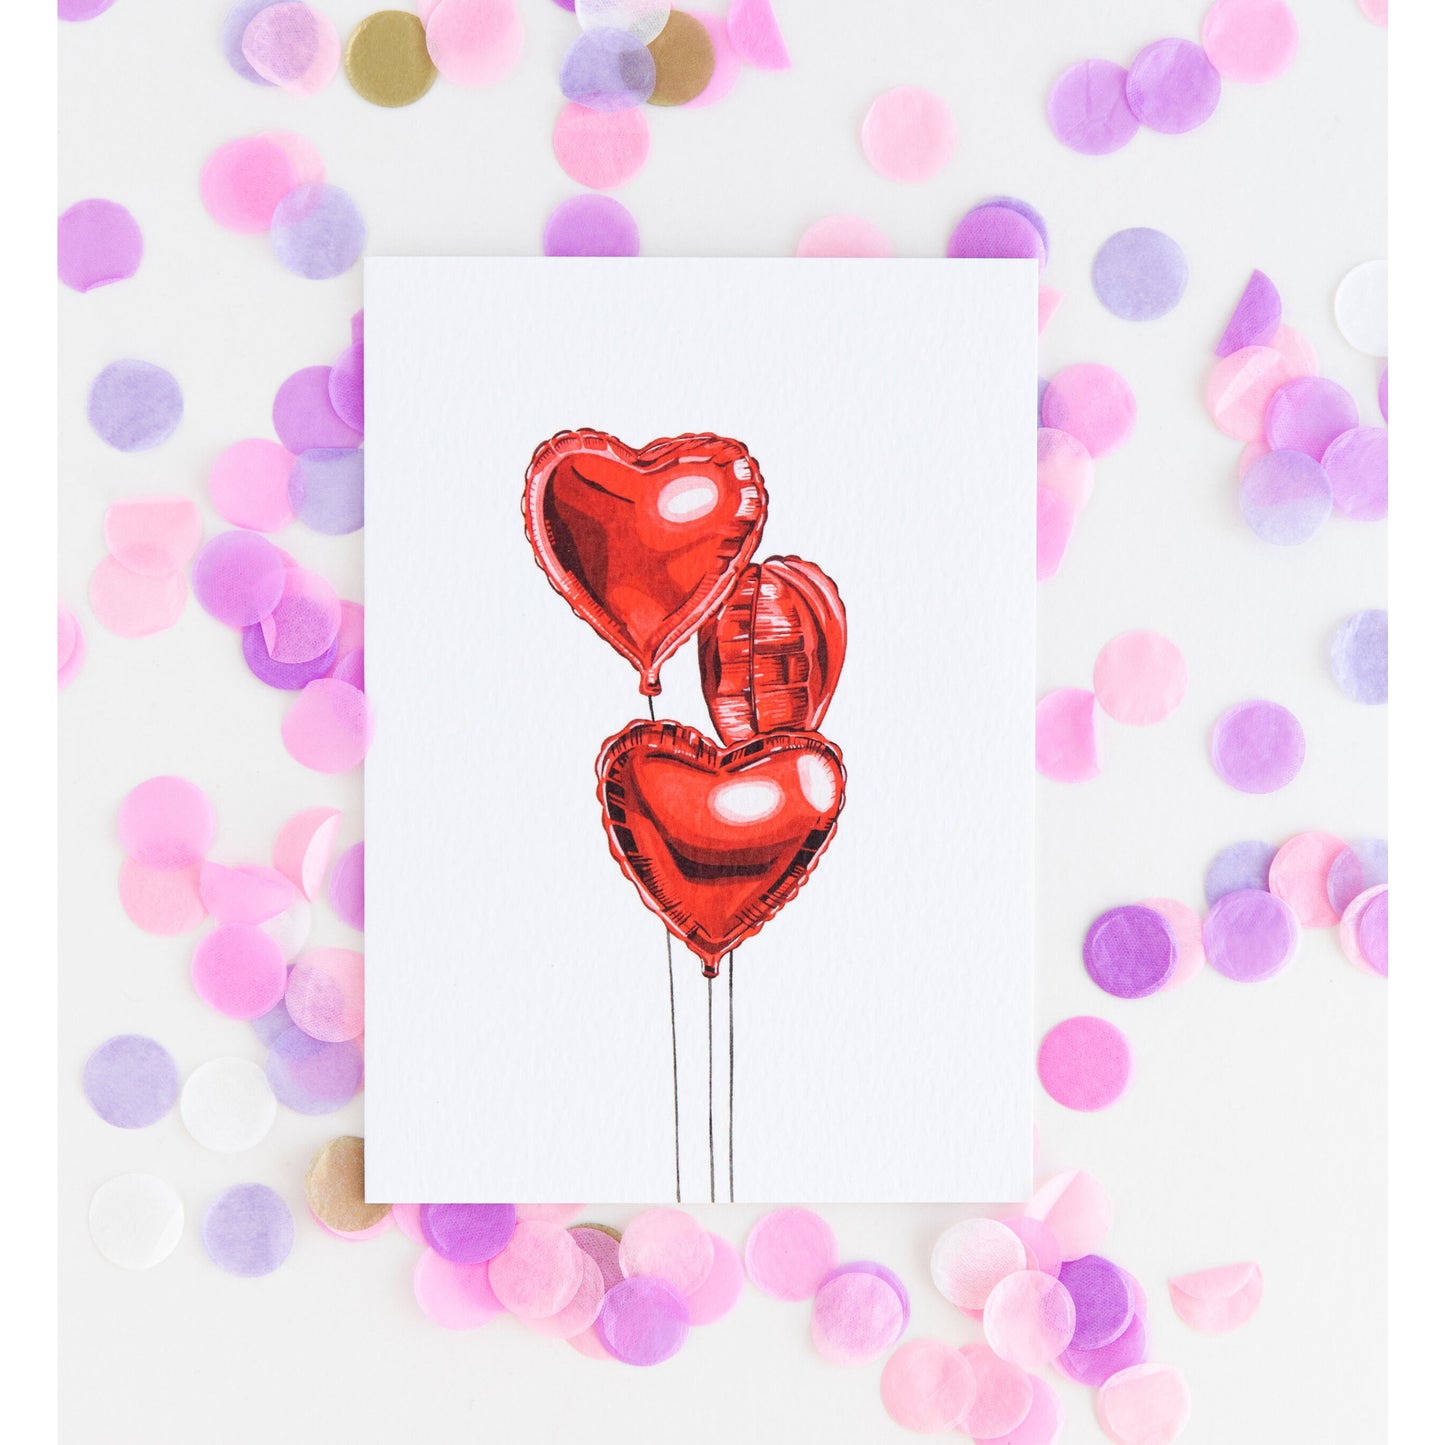 Red Heart Balloon Greeting Card